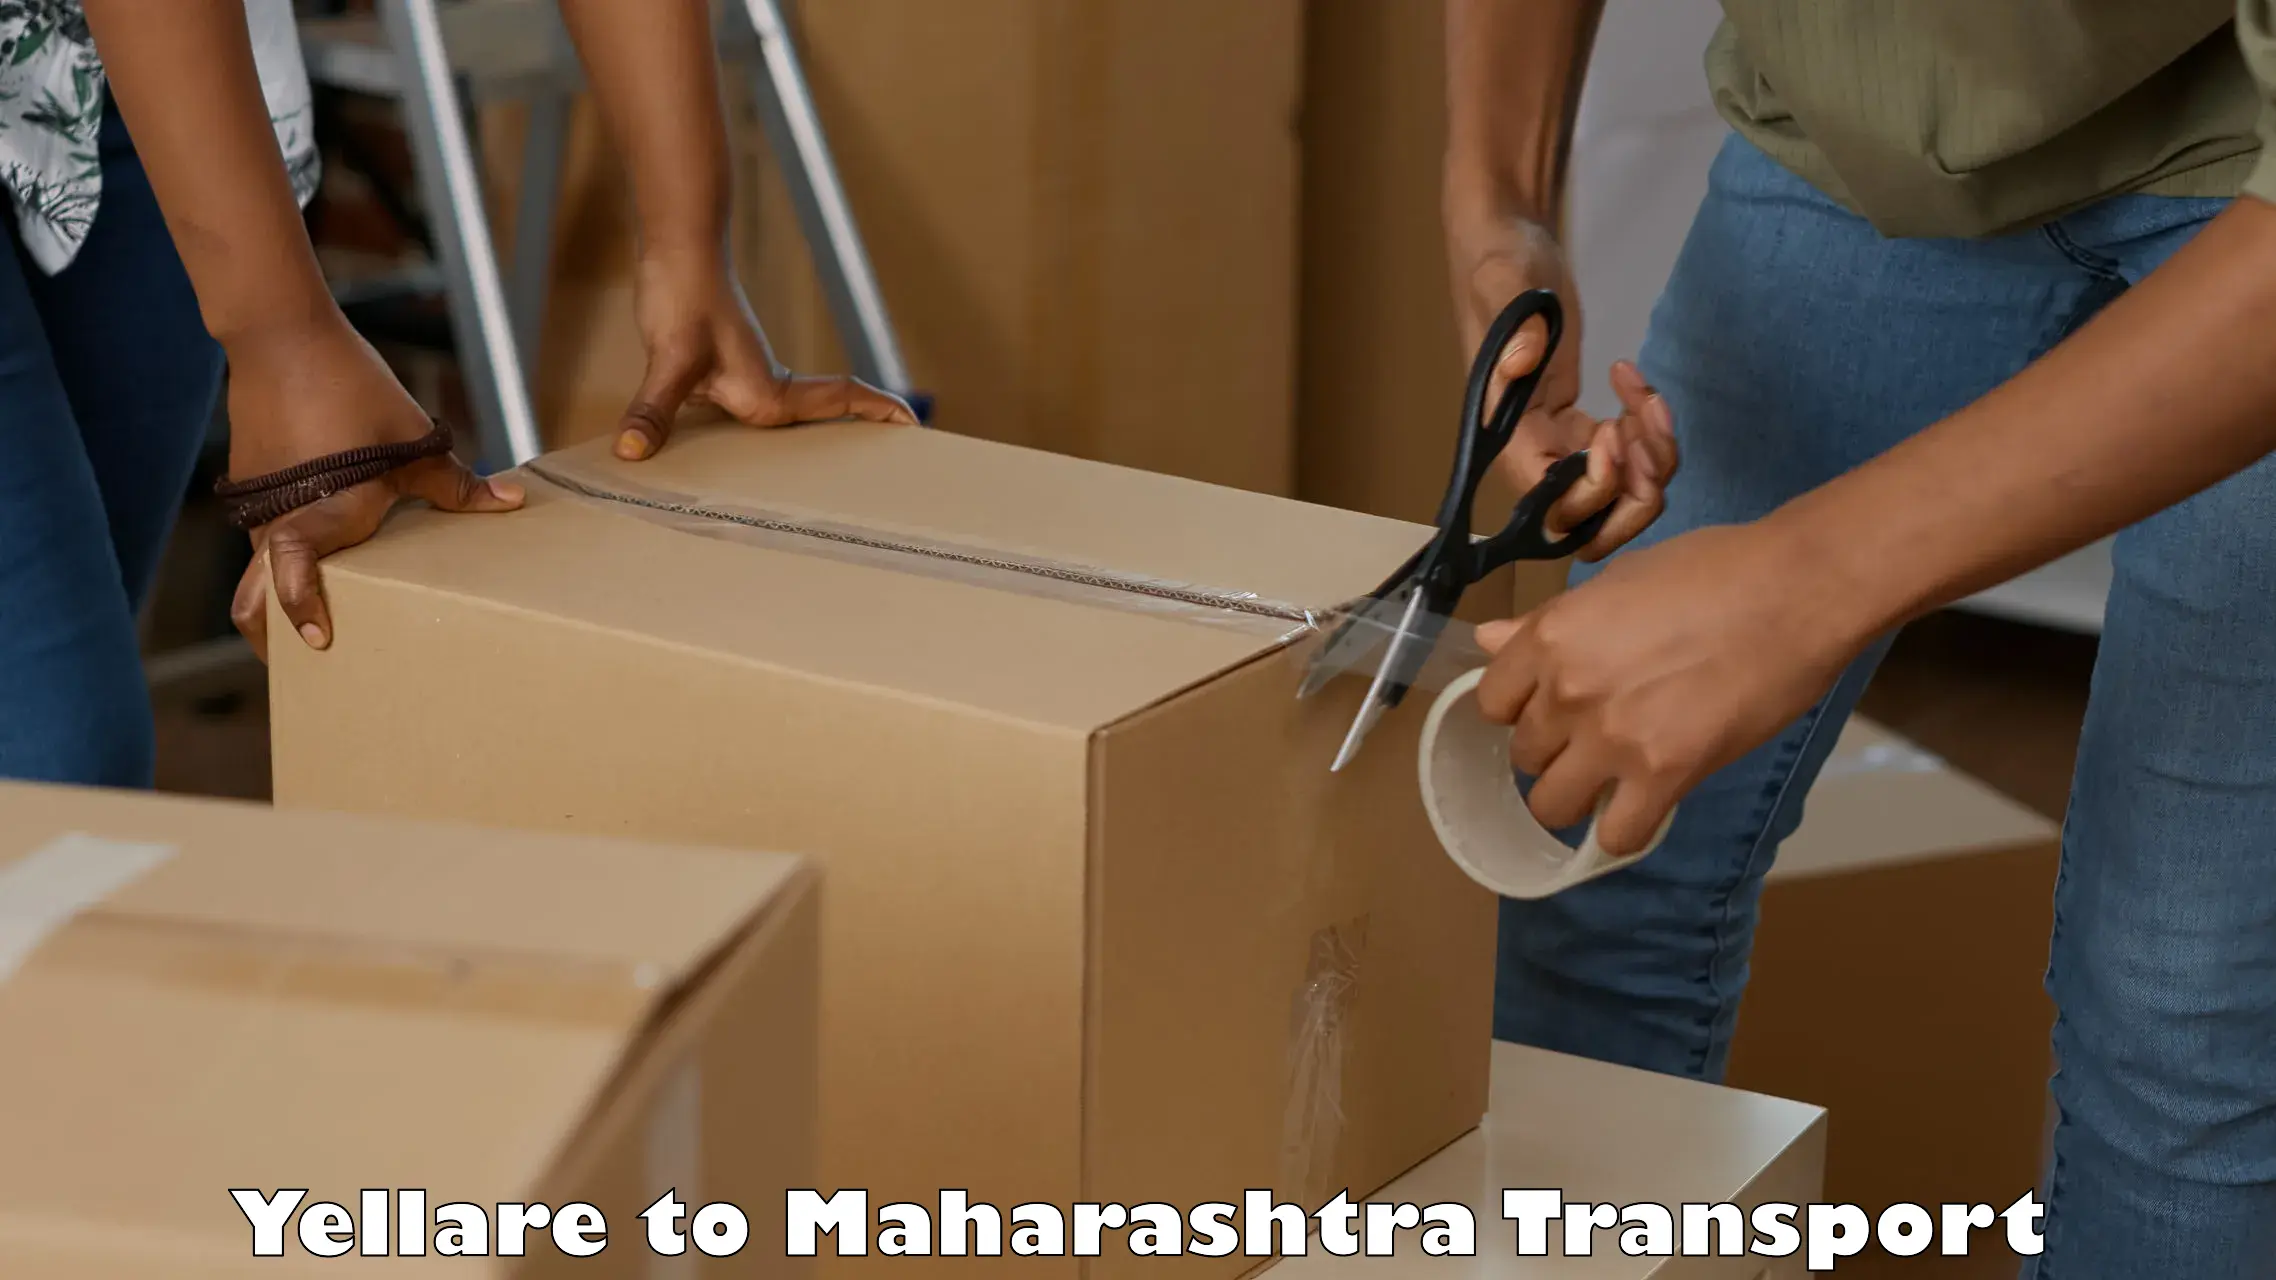 Part load transport service in India Yellare to Tasgaon